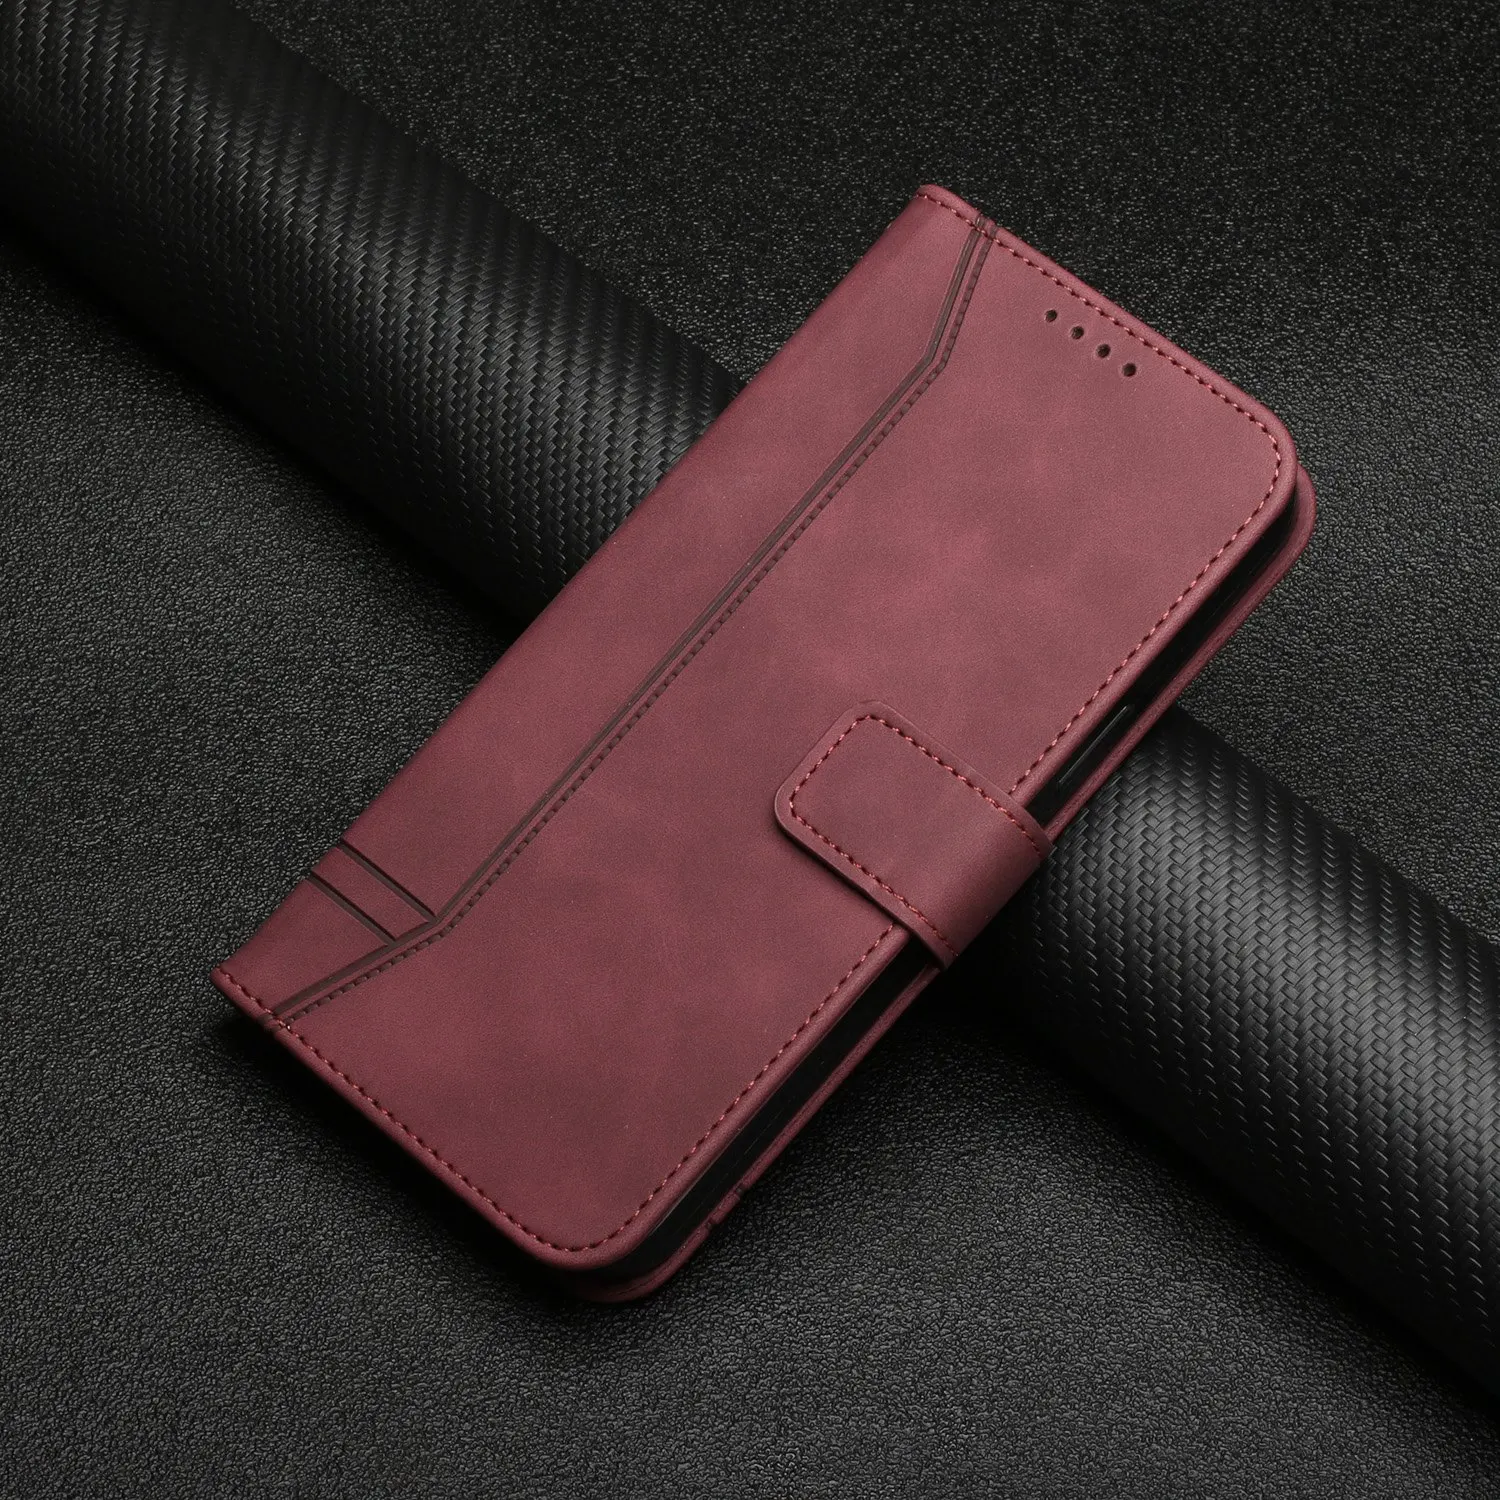 leather iphone 11 Pro Max case Flip Wallet Leather Case For Xiaomi Mi 11 Lite 5X 6X 9 SE Lite 9T CC9E Mi Note 10 10T Lite Pro 10s Coque Stand Book Phone Cover iphone 11 Pro Max  silicone case